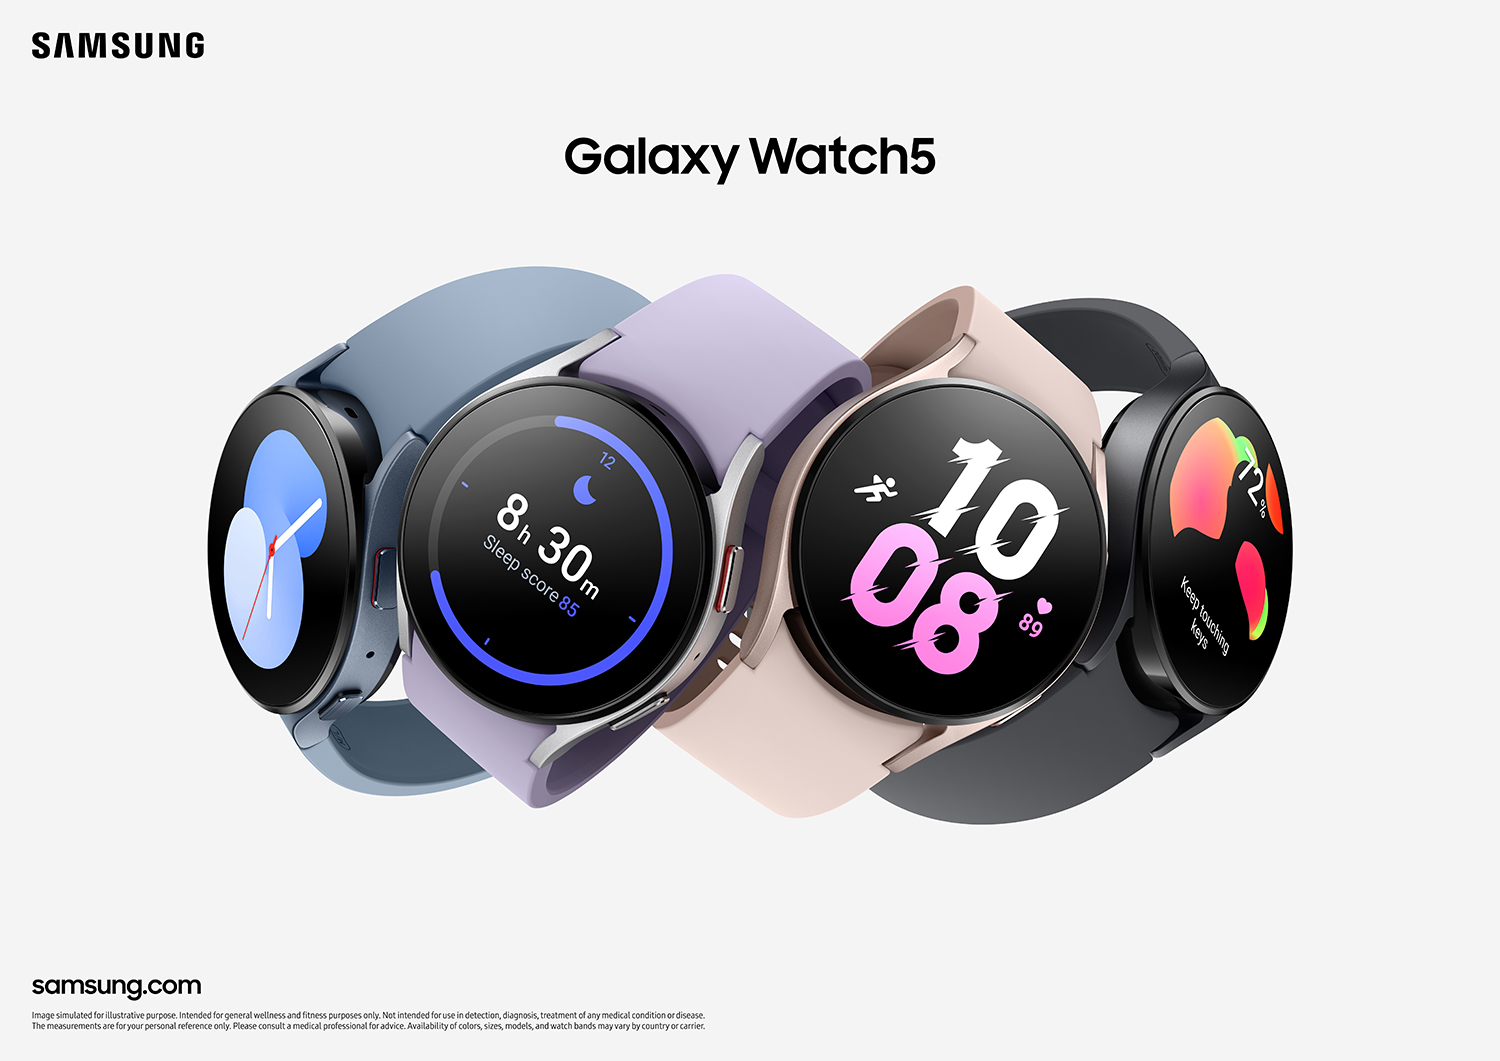 Samsung claims that both the Galaxy Watch5 and Galaxy Watch5 Pro will help people achieve personal goals.  (Samsung)